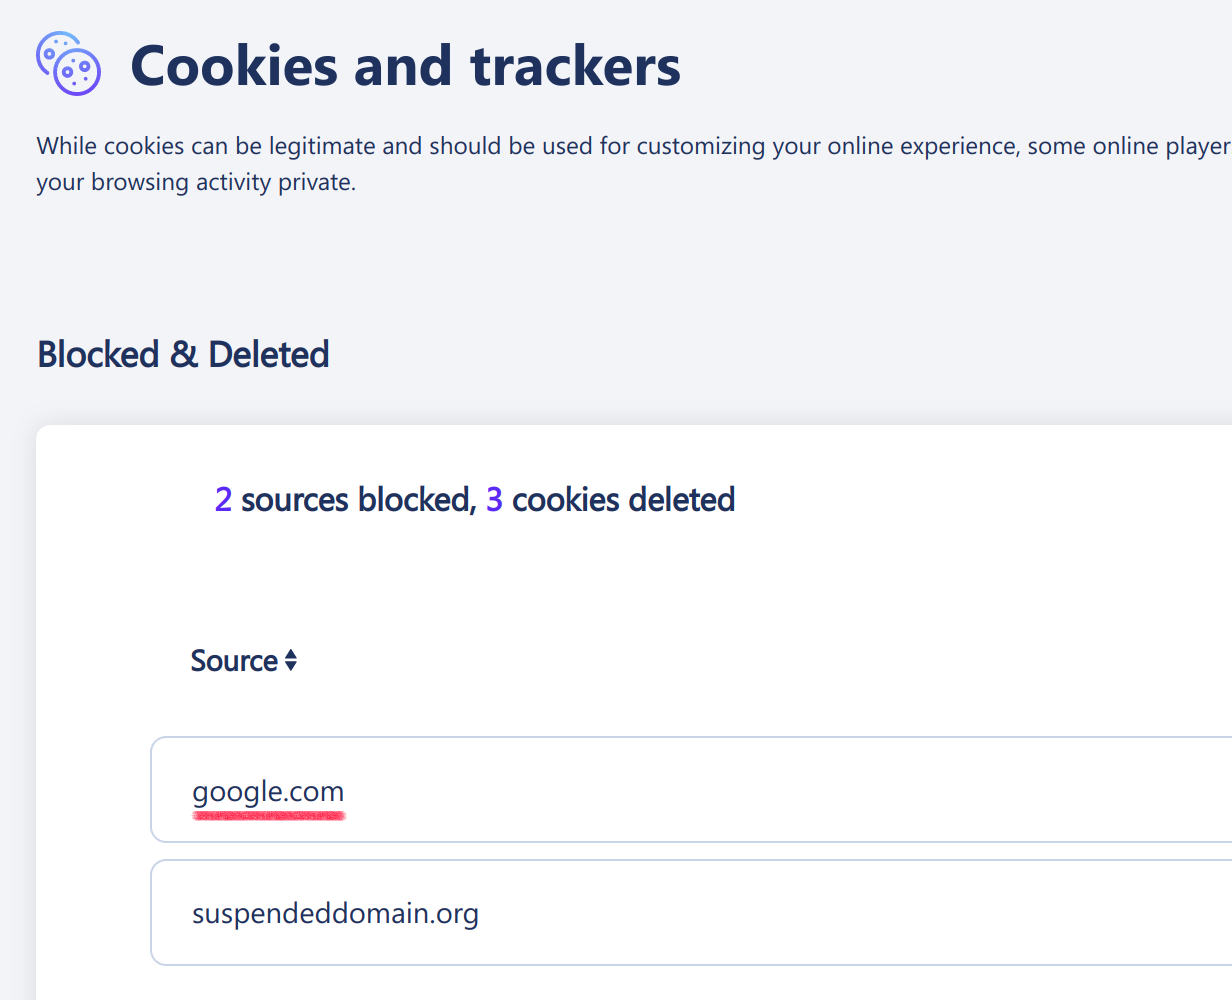 Page titled “Cookies and trackers” listing two sources: google.com and suspendeddomain.org. The former is underlined with a thick red line.